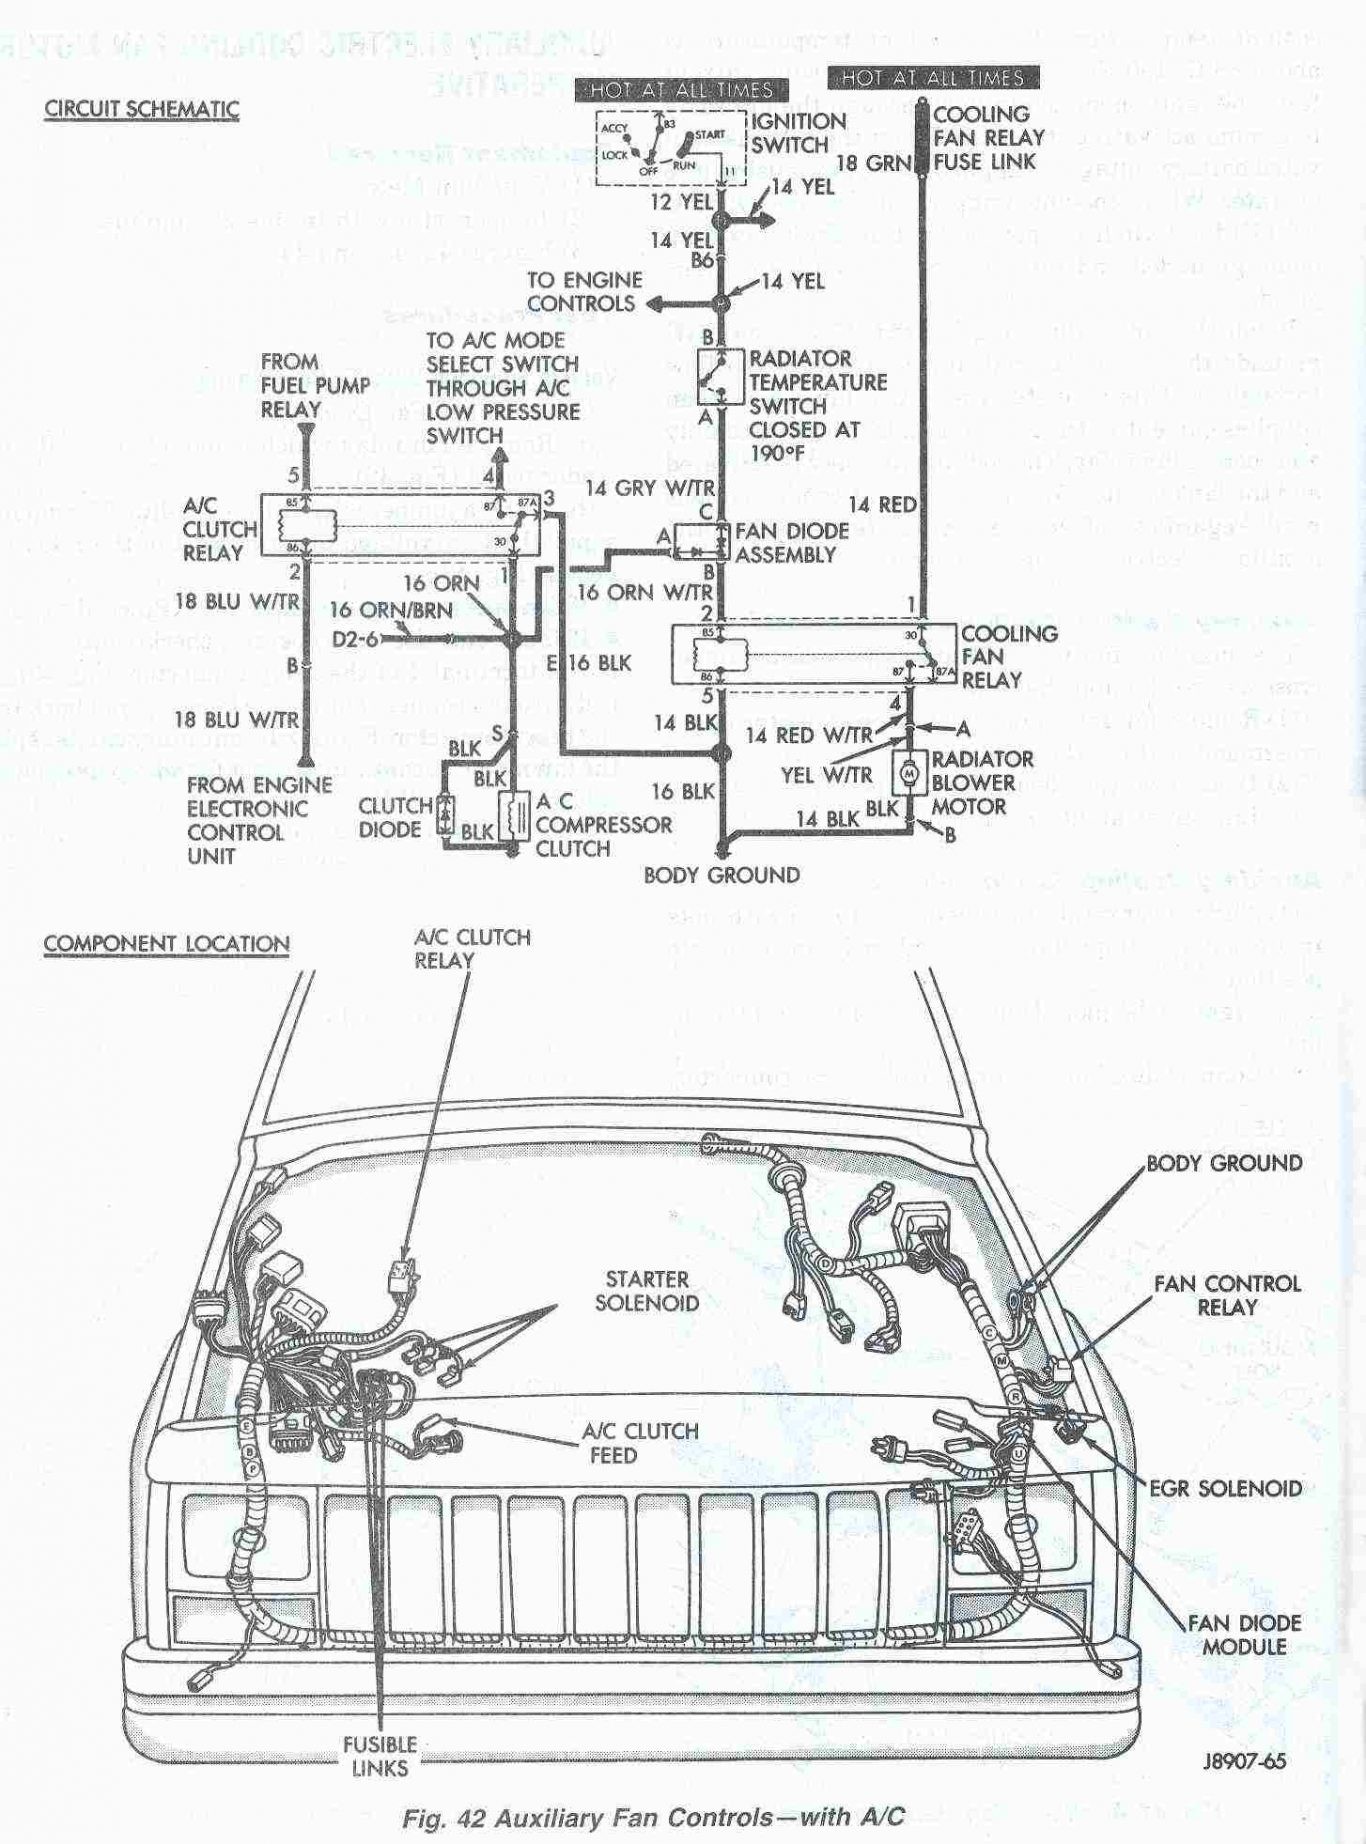 2000 Jeep Cherokee Wiring Diagram Jeep Cherokee Stereo Wiring Diagram and Wrangler for Radio with Yj Of 2000 Jeep Cherokee Wiring Diagram